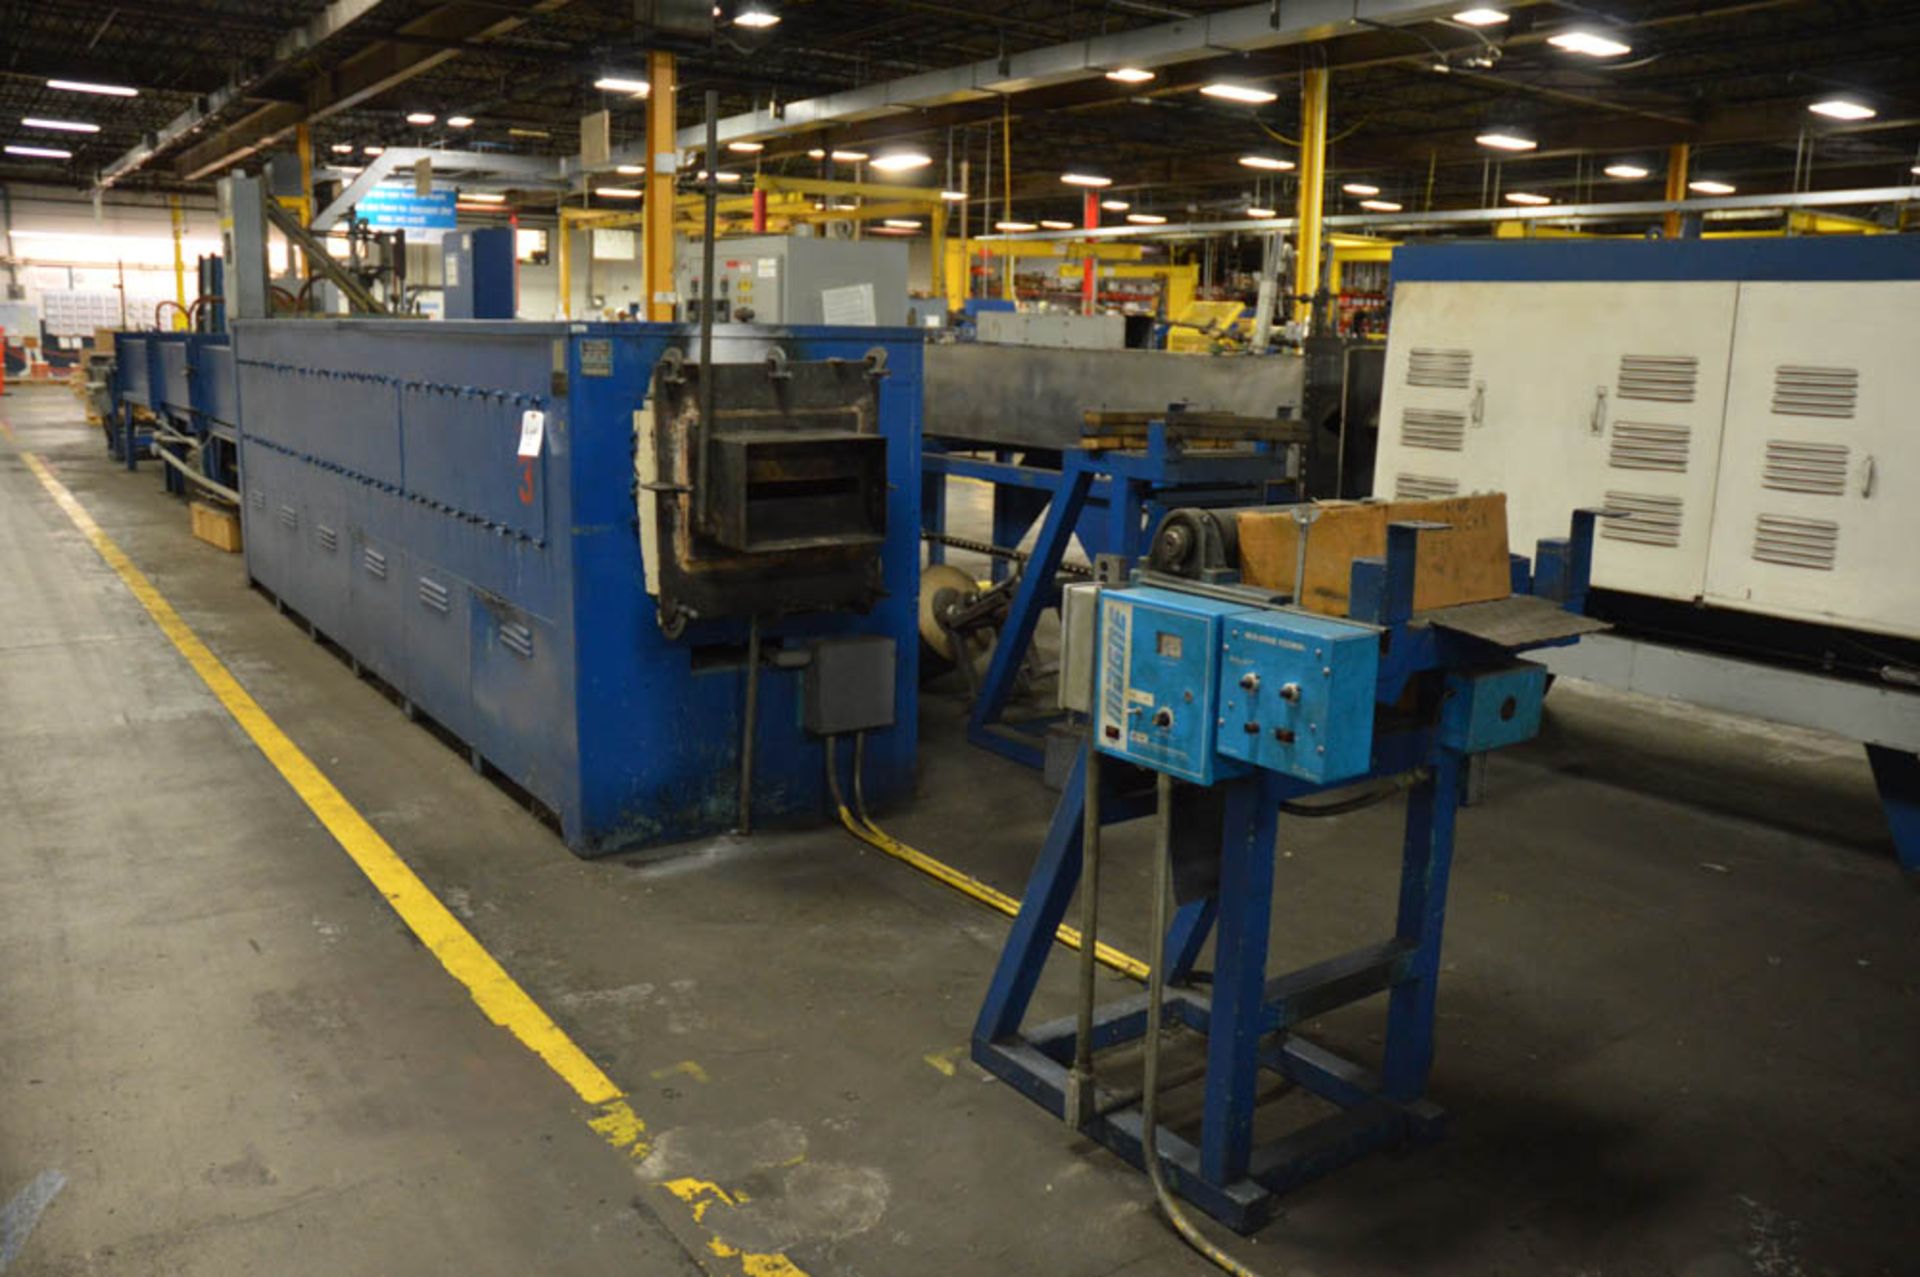 C.I. HAYES STRIP ANNEALING FURNACE, 1" - 12" STRIP WIDTH, 4,000# COIL WEIGHT, 16" / 42" COIL ID /